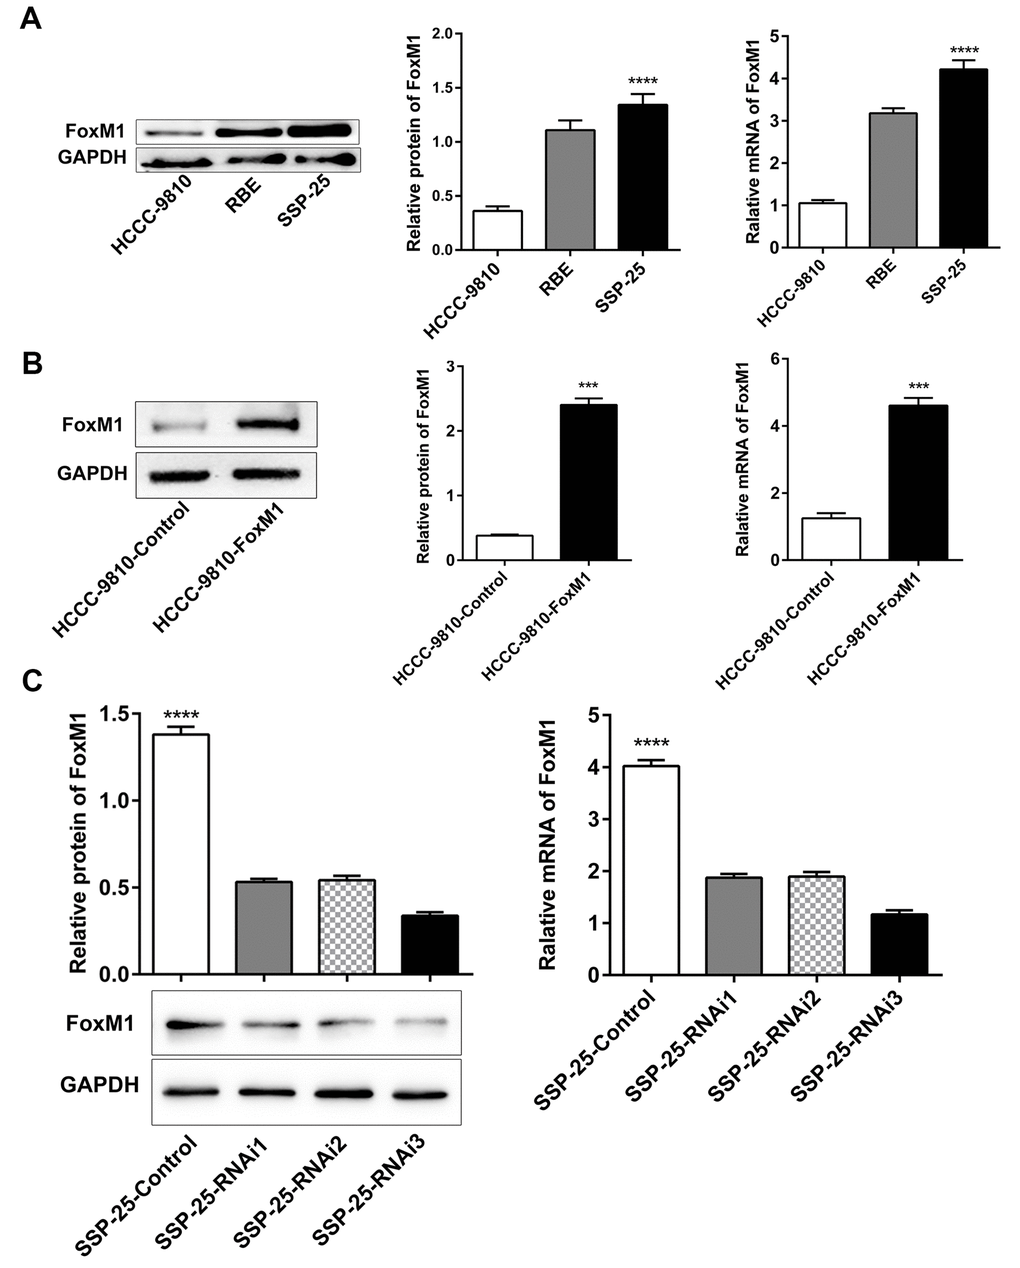 Selection and establishment of stably transfected ICC cell lines with FoxM1. (A) The protein and mRNA expression of FoxM1 in ICC cell lines (HCCC-9810, RBE, and SSP-25). Western blotting and qRT-PCR analysis showed successful overexpression (B) and knockdown (C) of FoxM1 in ICC cells (HCCC-9810 and SSP-25, respectively). ***P ****P 